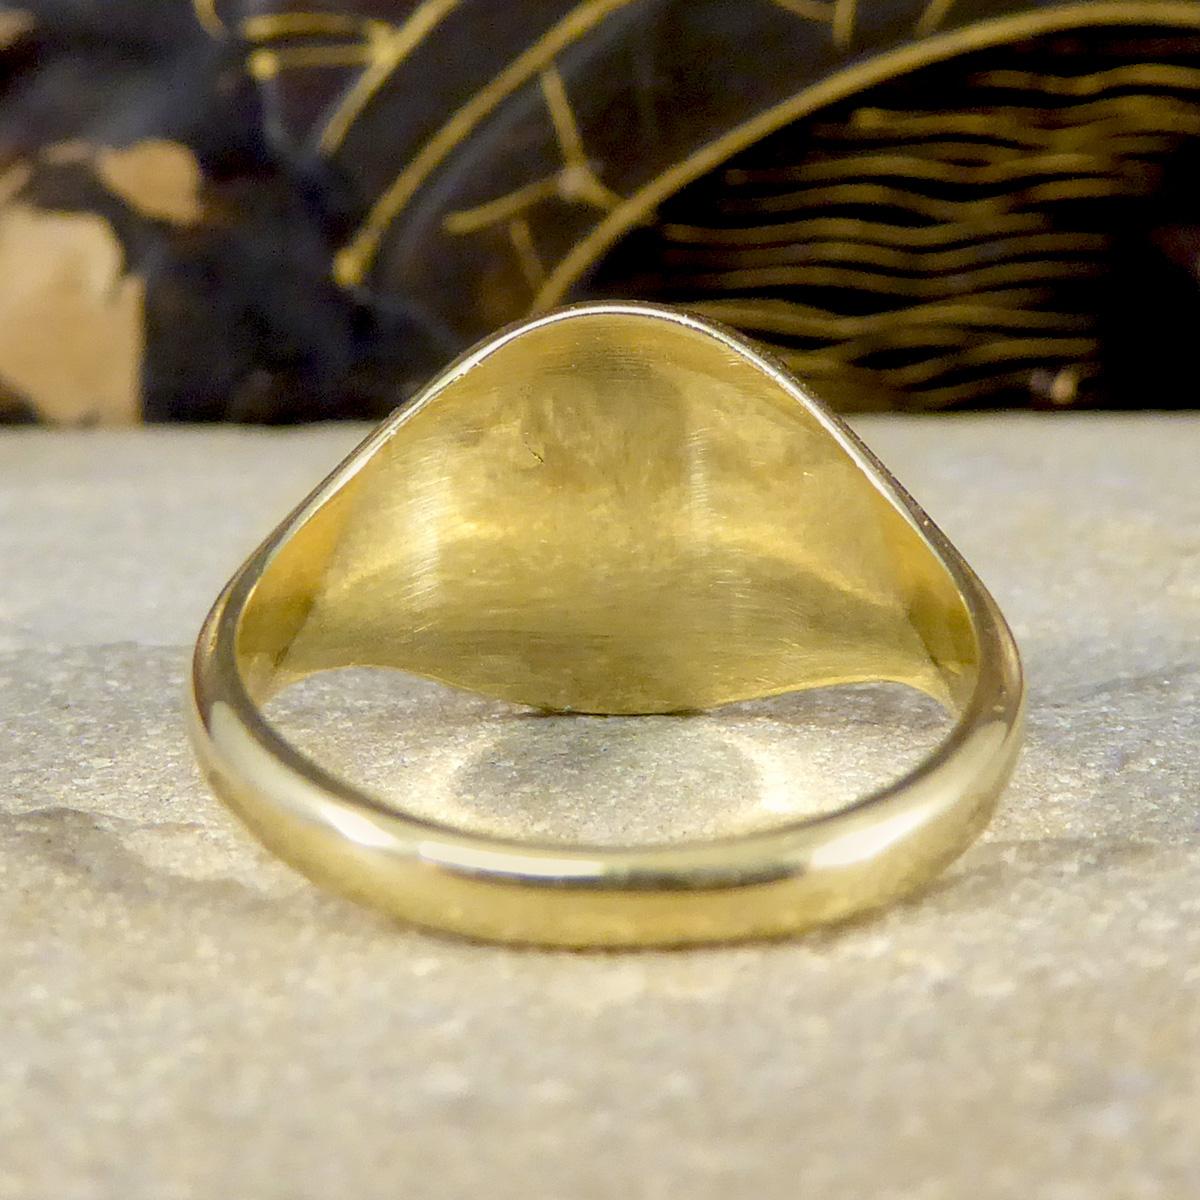 Modern New Circular Signet Pinky Ring in 9ct Yellow Gold